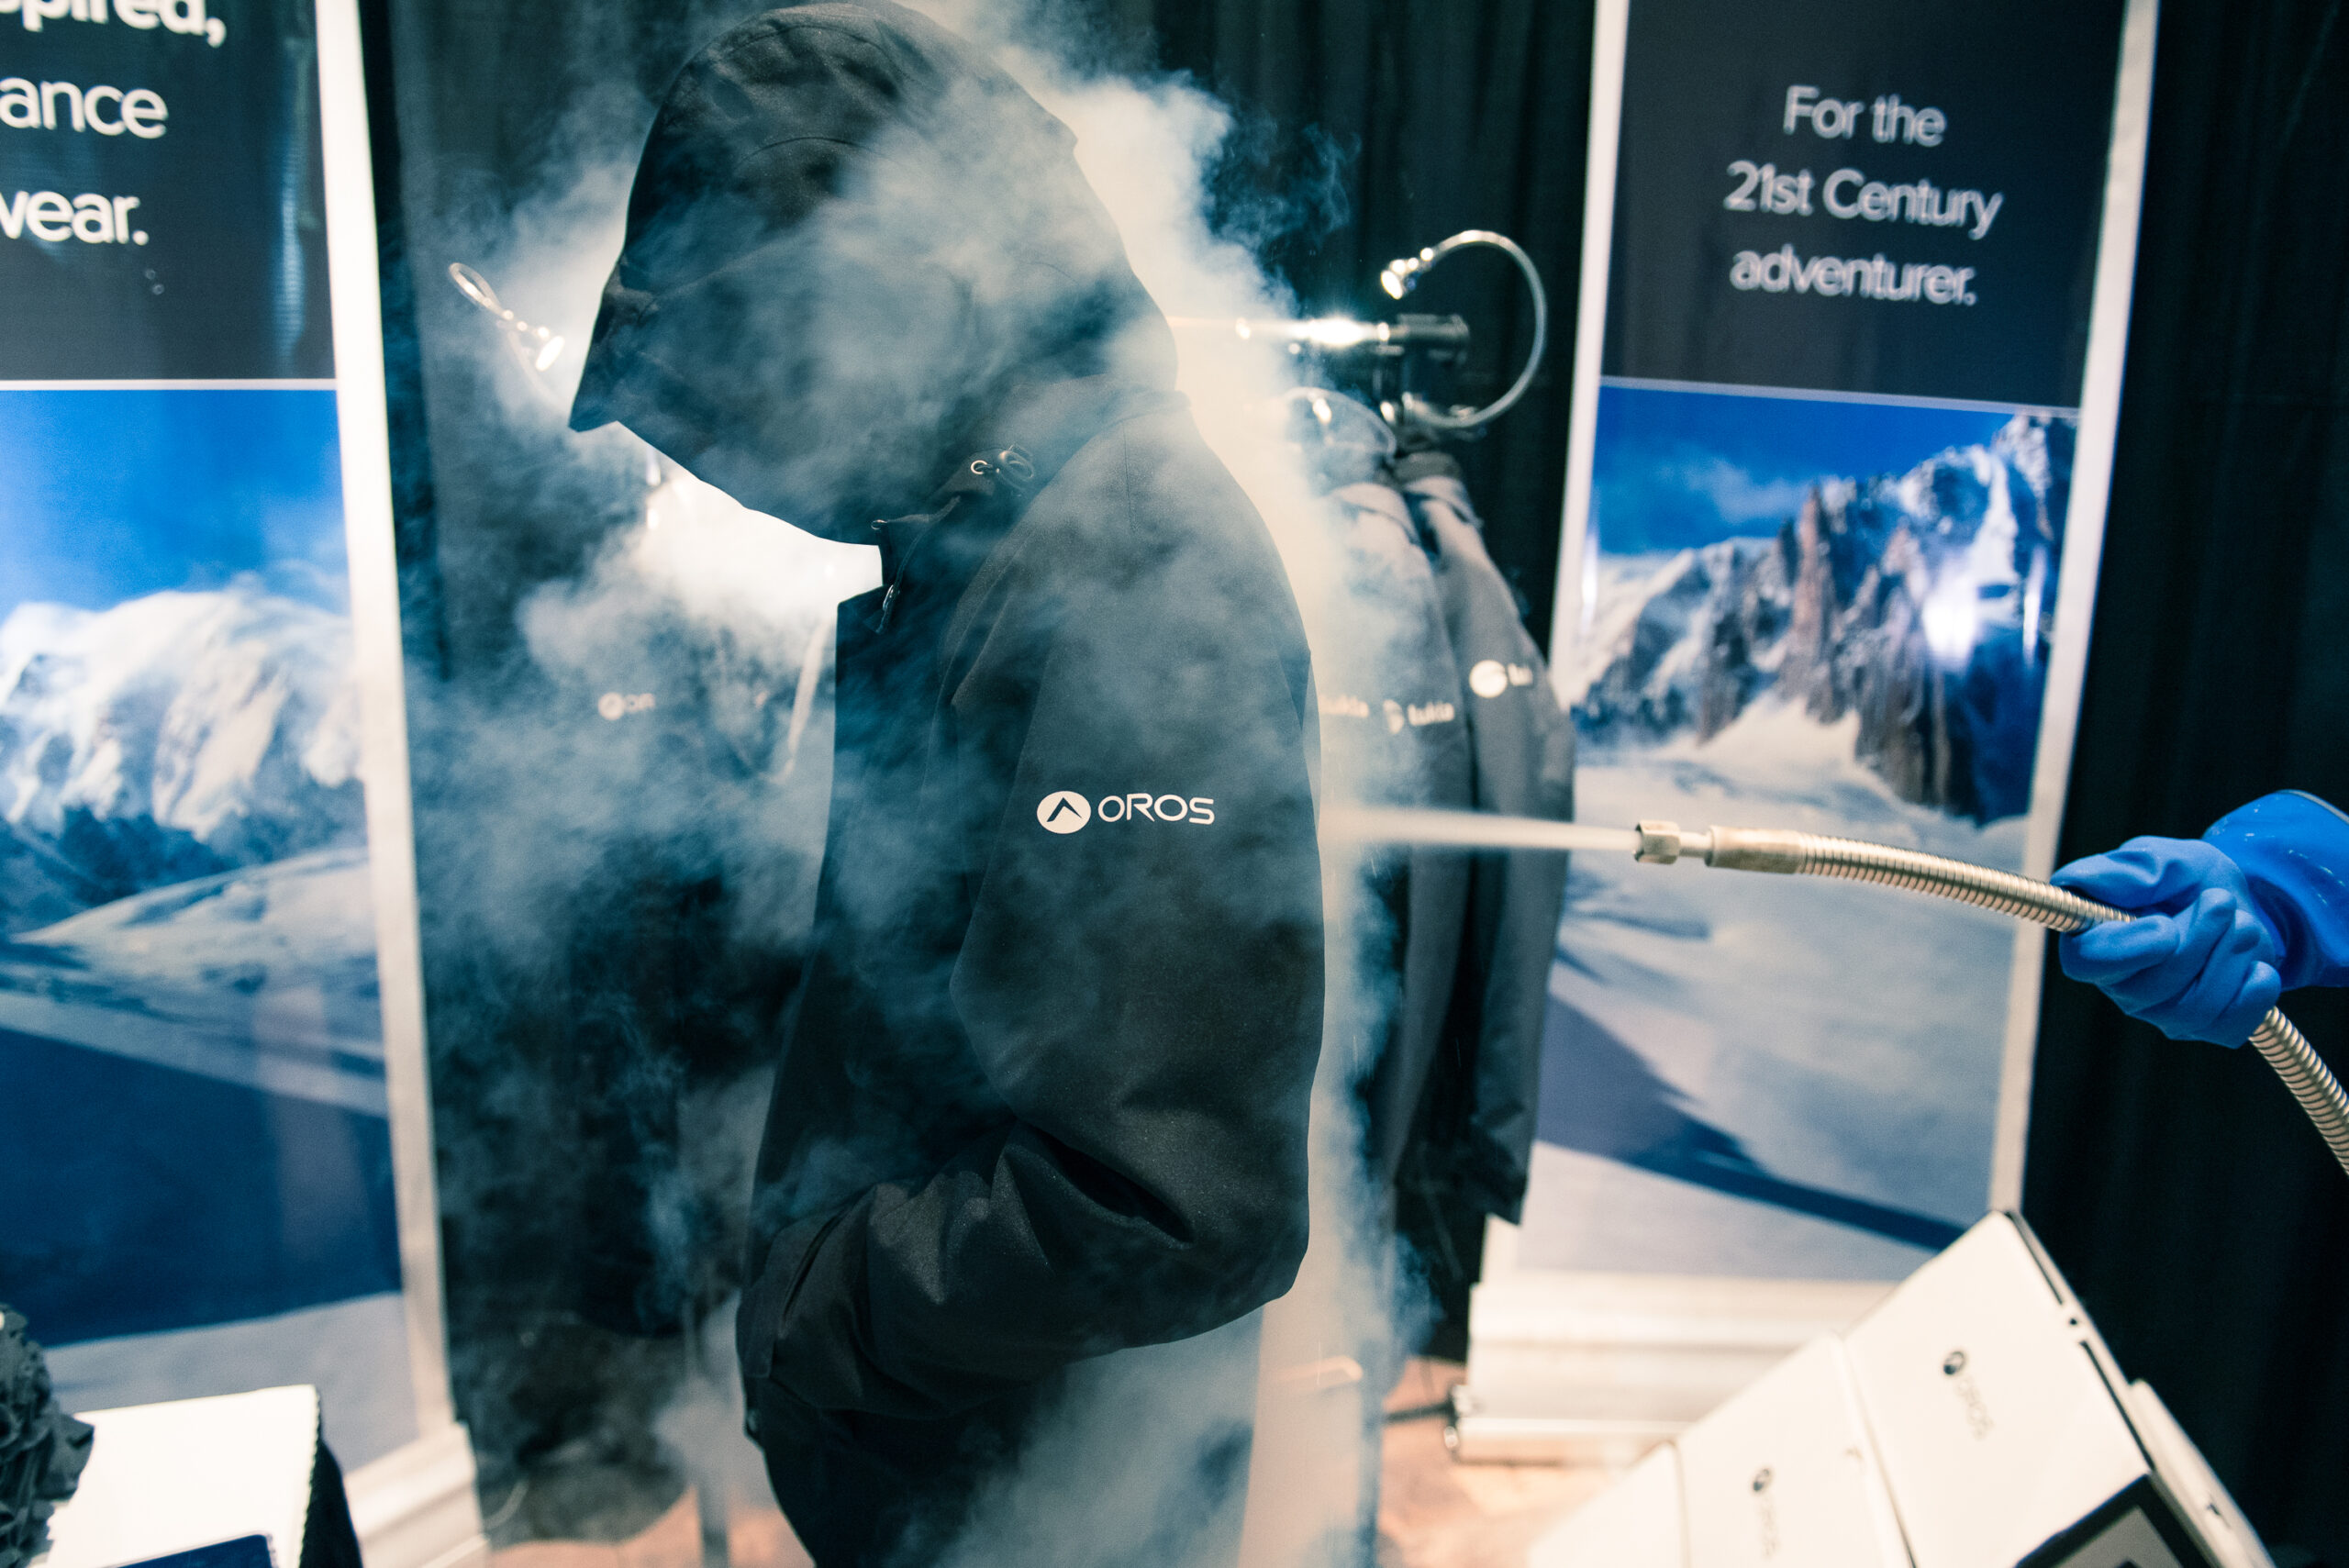 Clothing Insulated With Aerogel Promises To Keep Out The Most Dire Cold